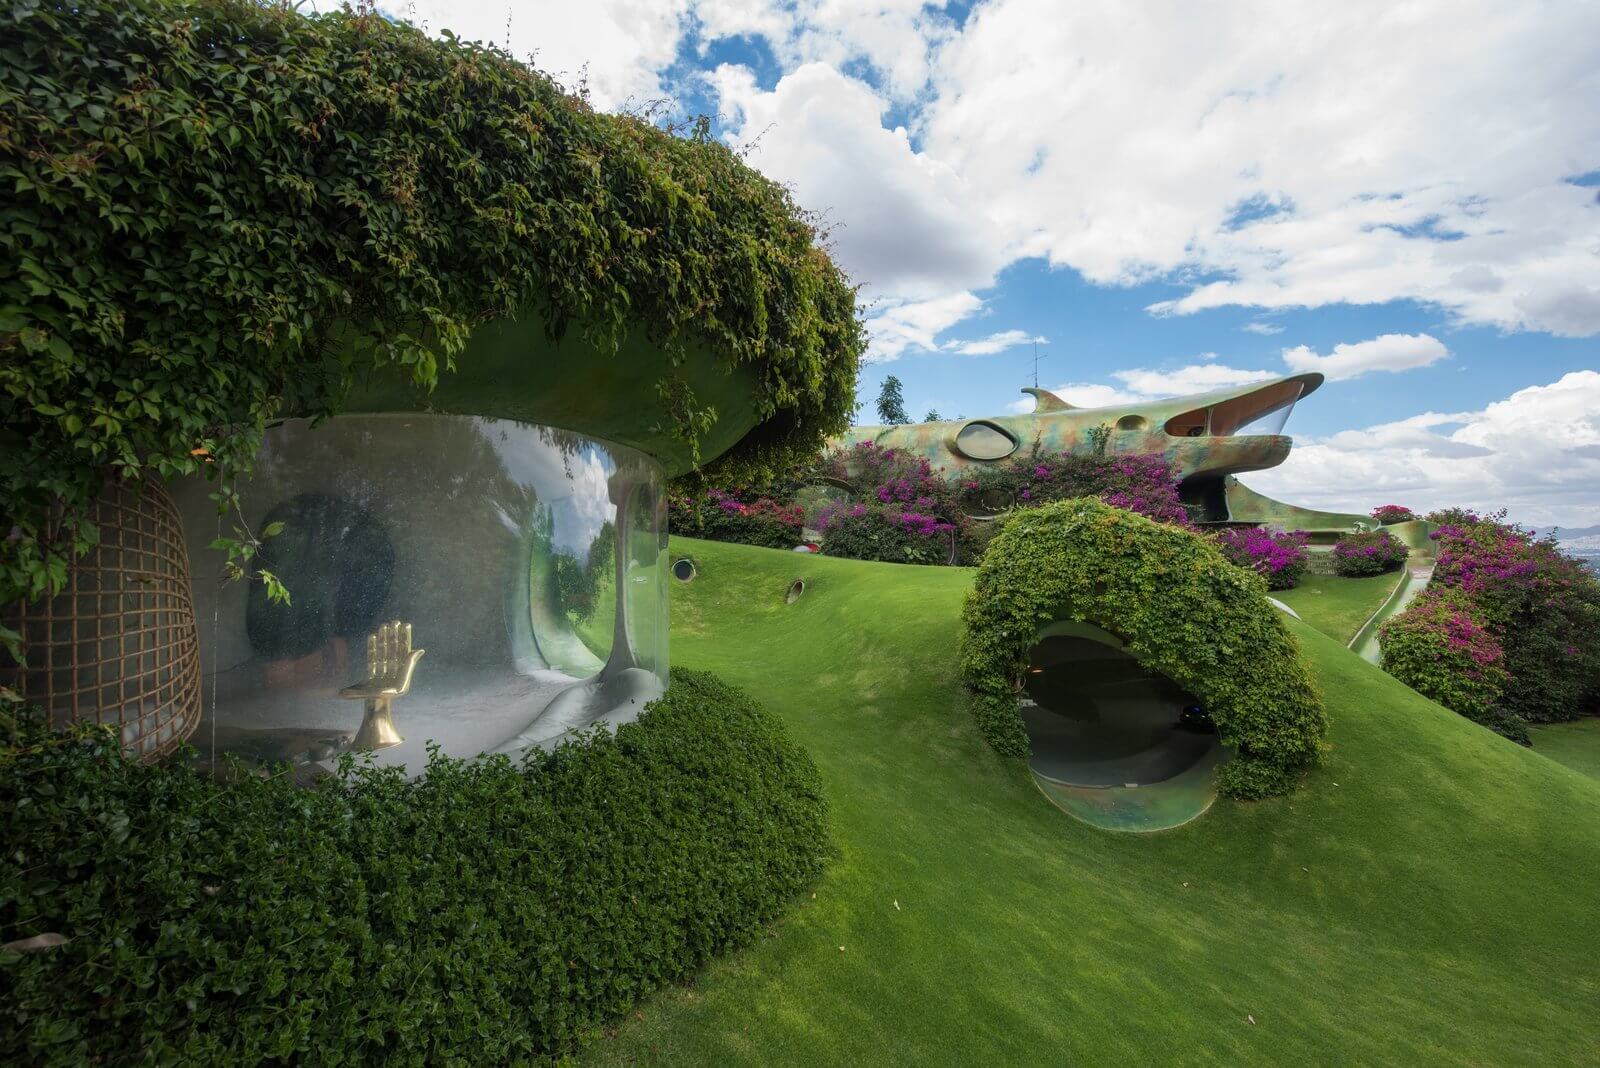 Mesmerizing Pictures Of An Underground Hobbit Style House